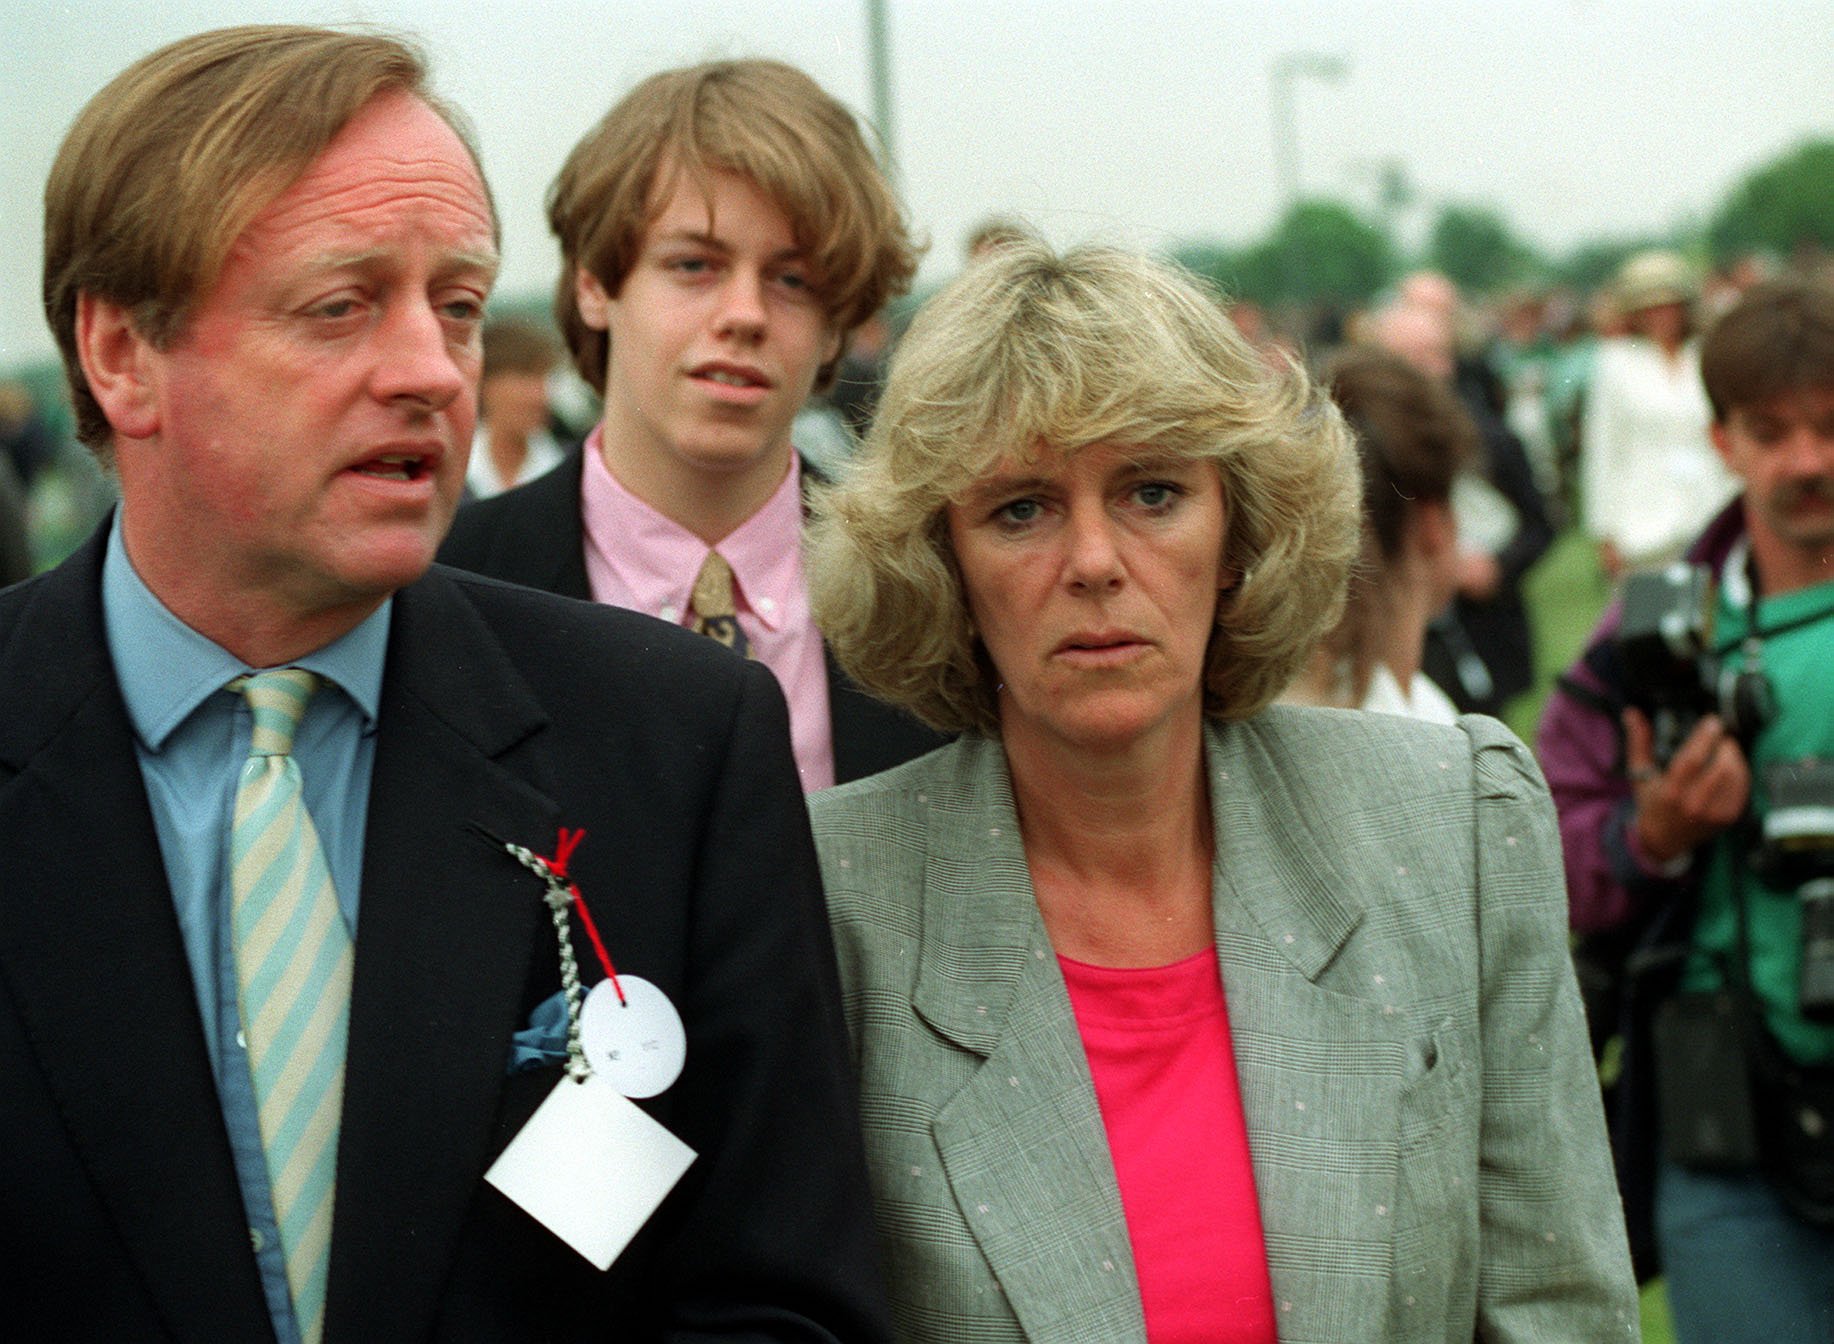 Andrew, his son, Tom, and wife Camilla Parker Bowles at a Polo event at Smith's Lawn in Windsor, on June 7, 1992 | Source: Getty Images